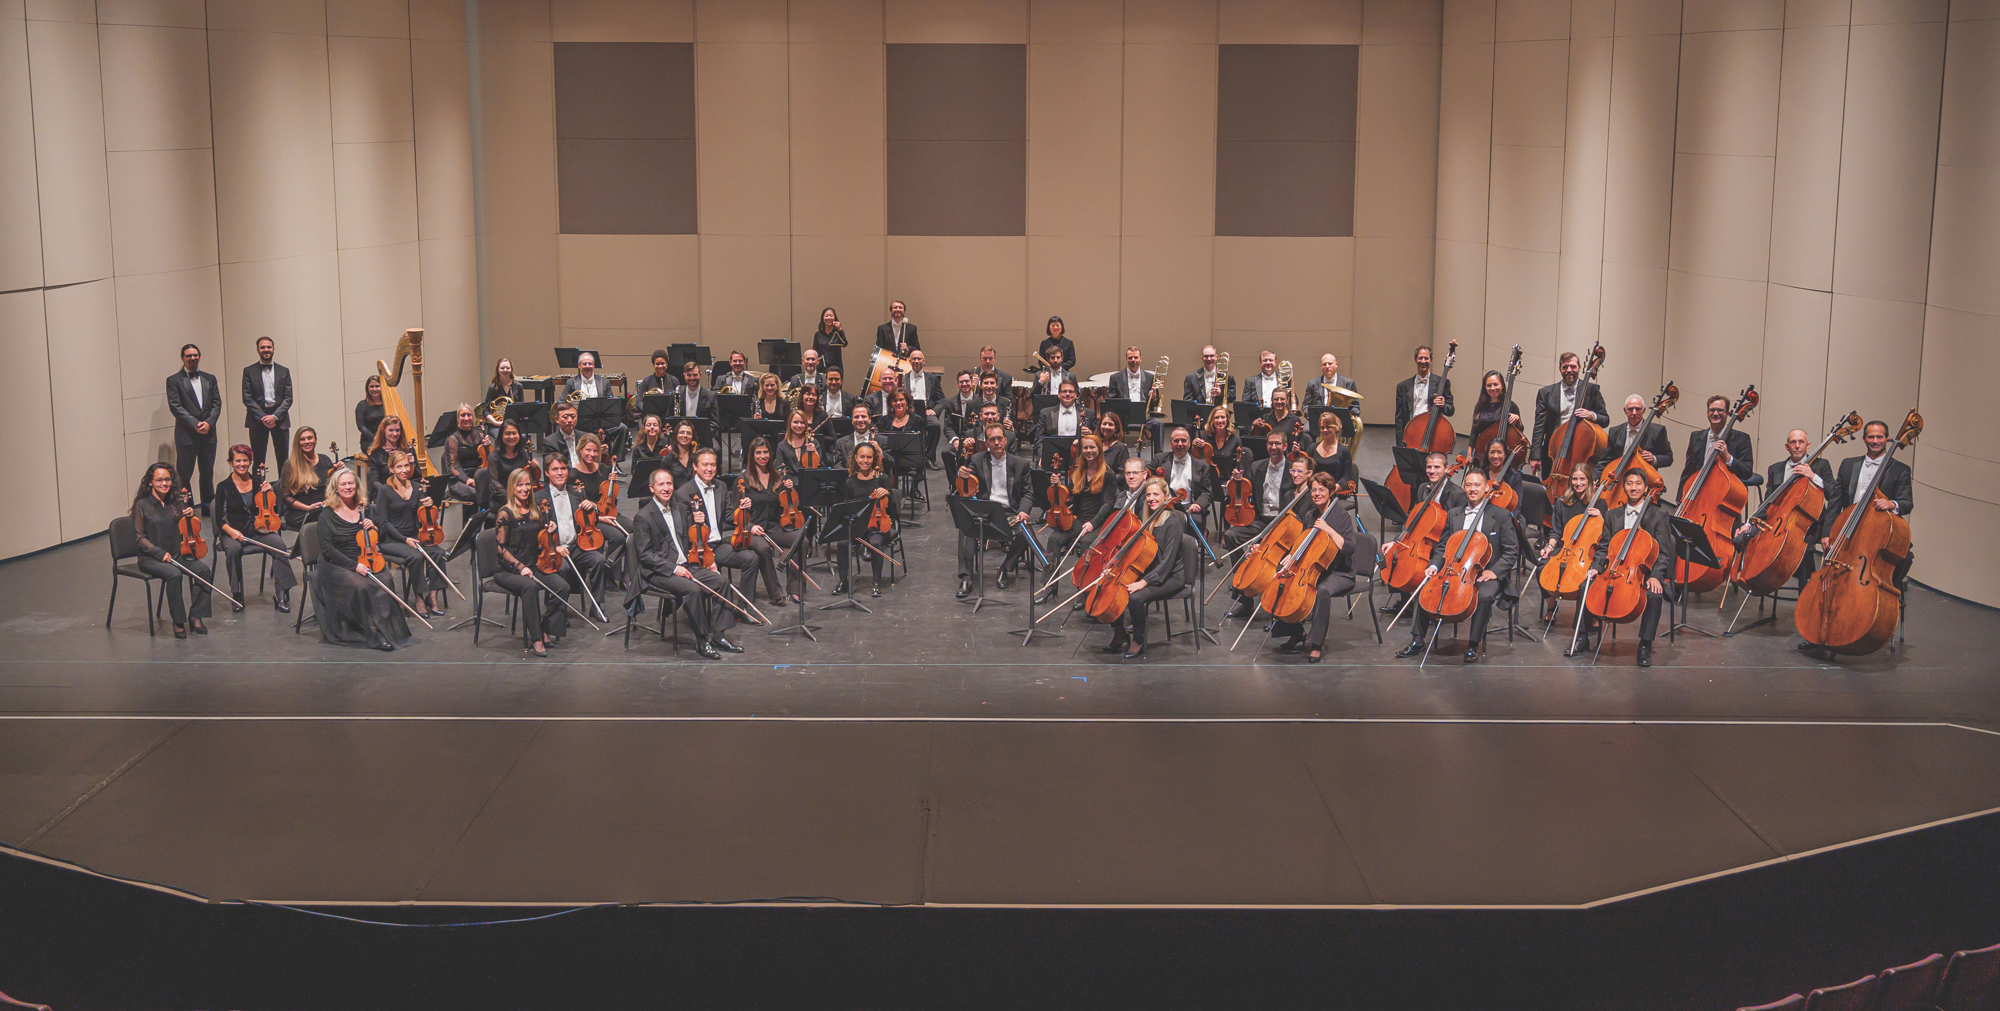 For the Sarasota Orchestra, even a rehearsal would exceed the CDCs 50-person limit on groupings.